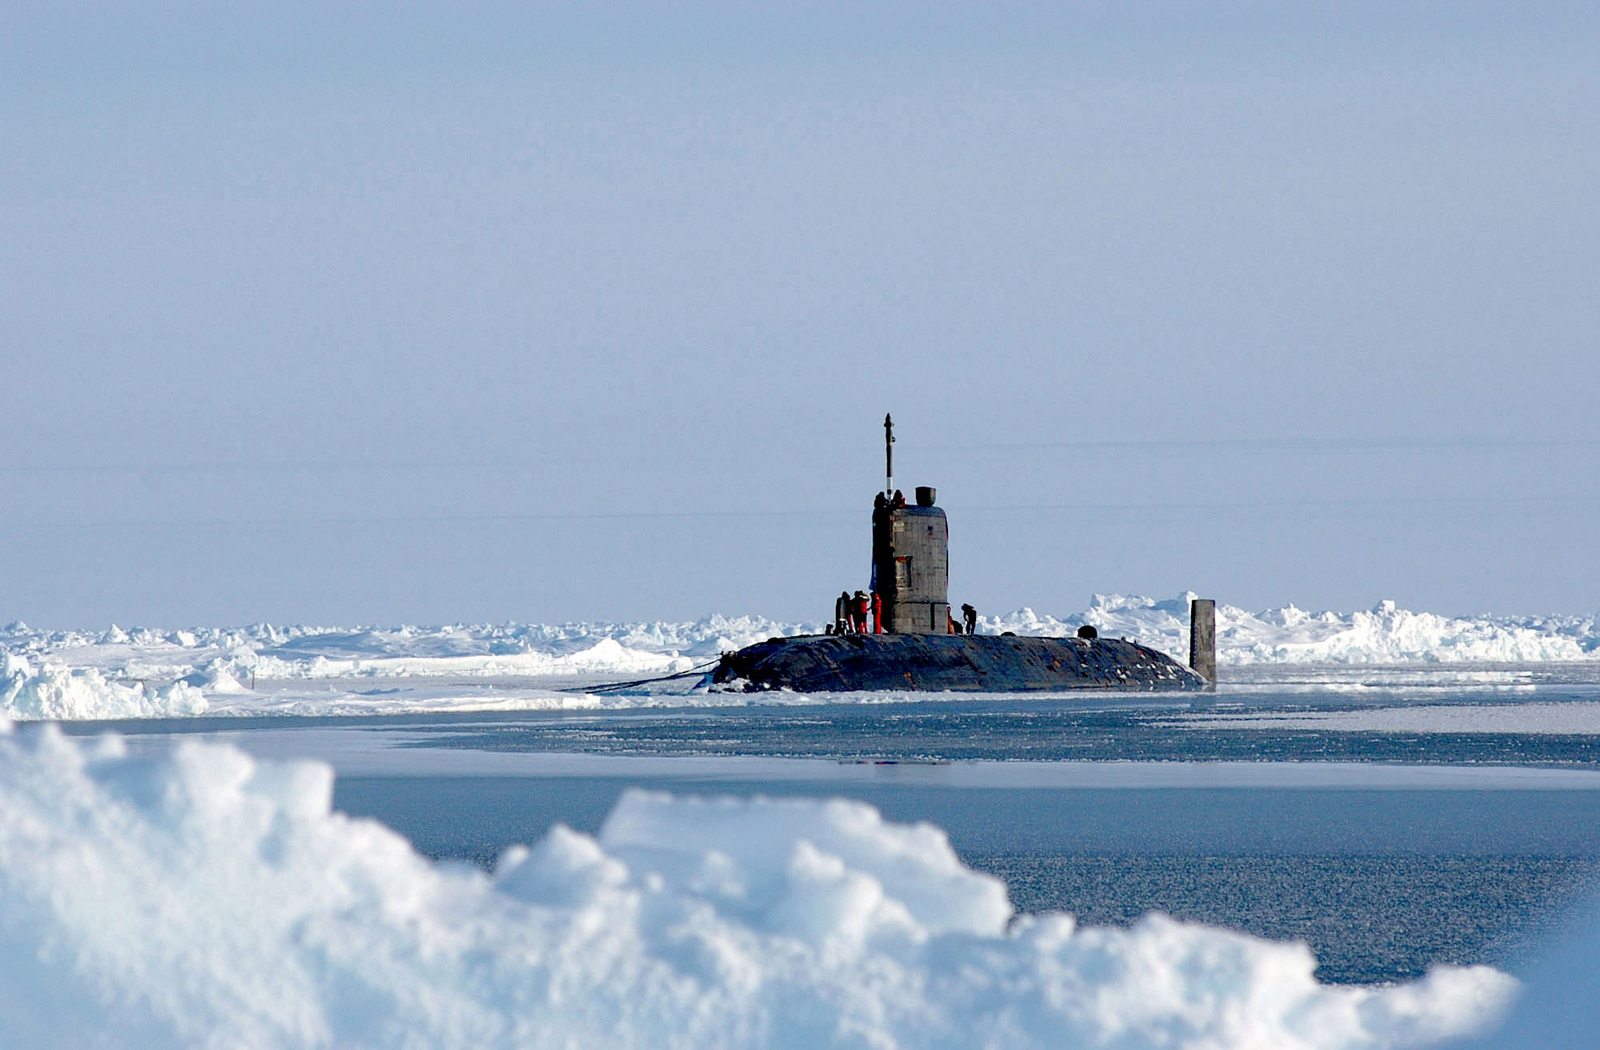 The military capabilities among Antarctic claimant states